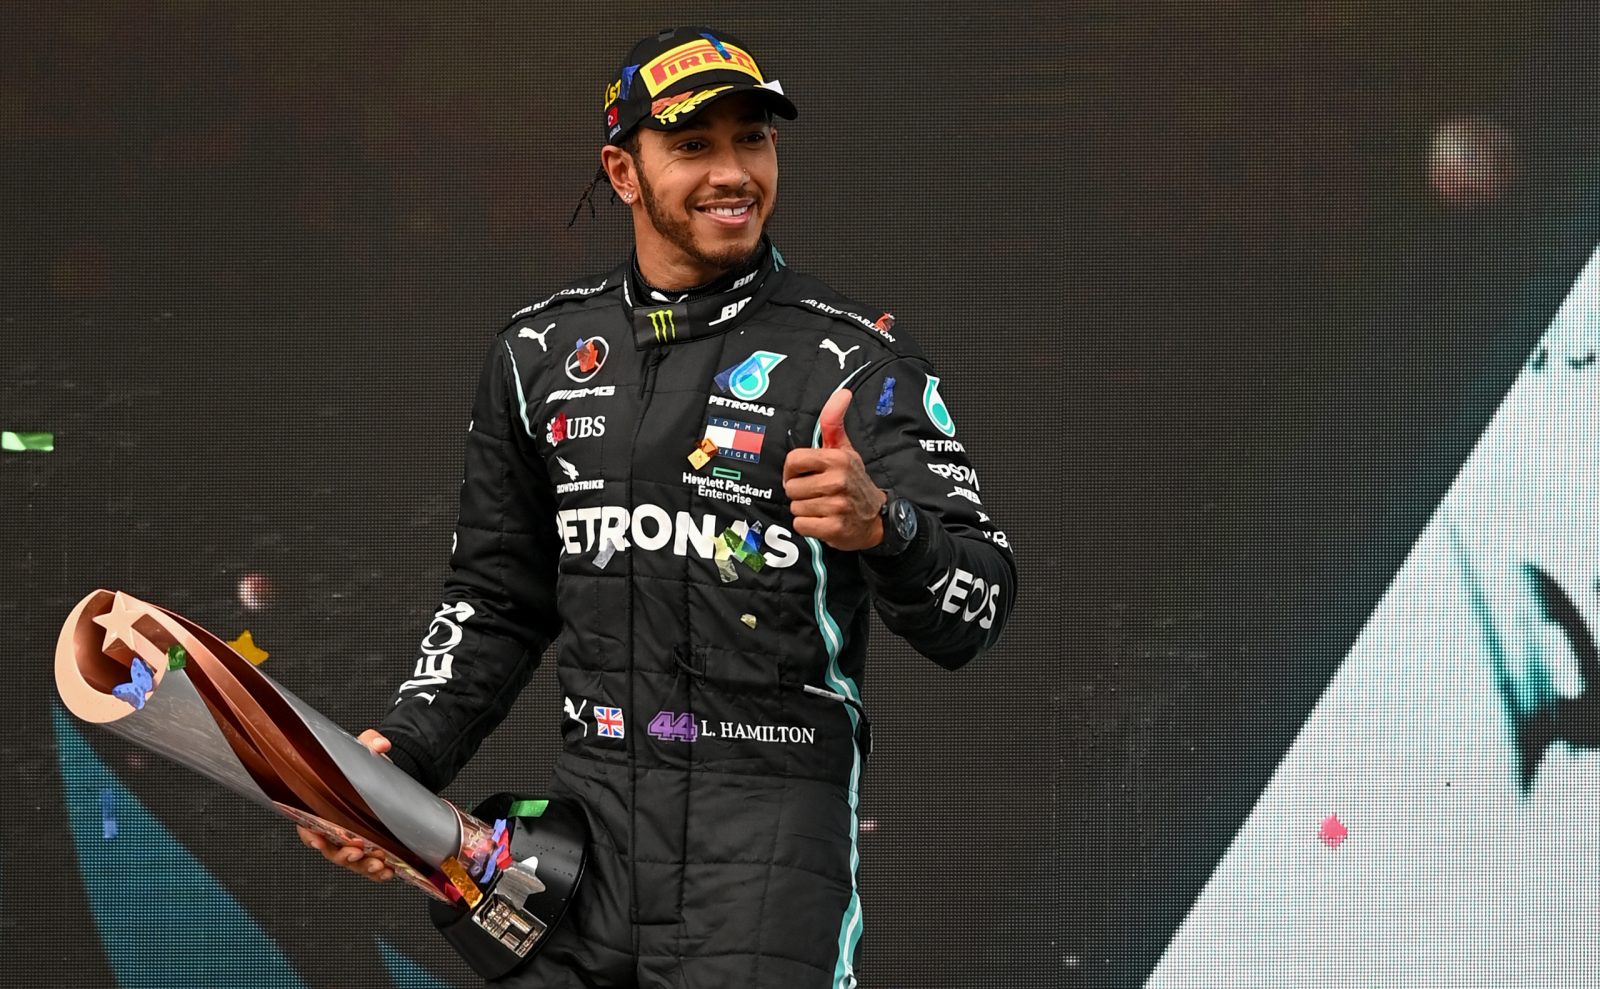 Lewis Hamilton Who is the greatest Formula 1 driver ever?